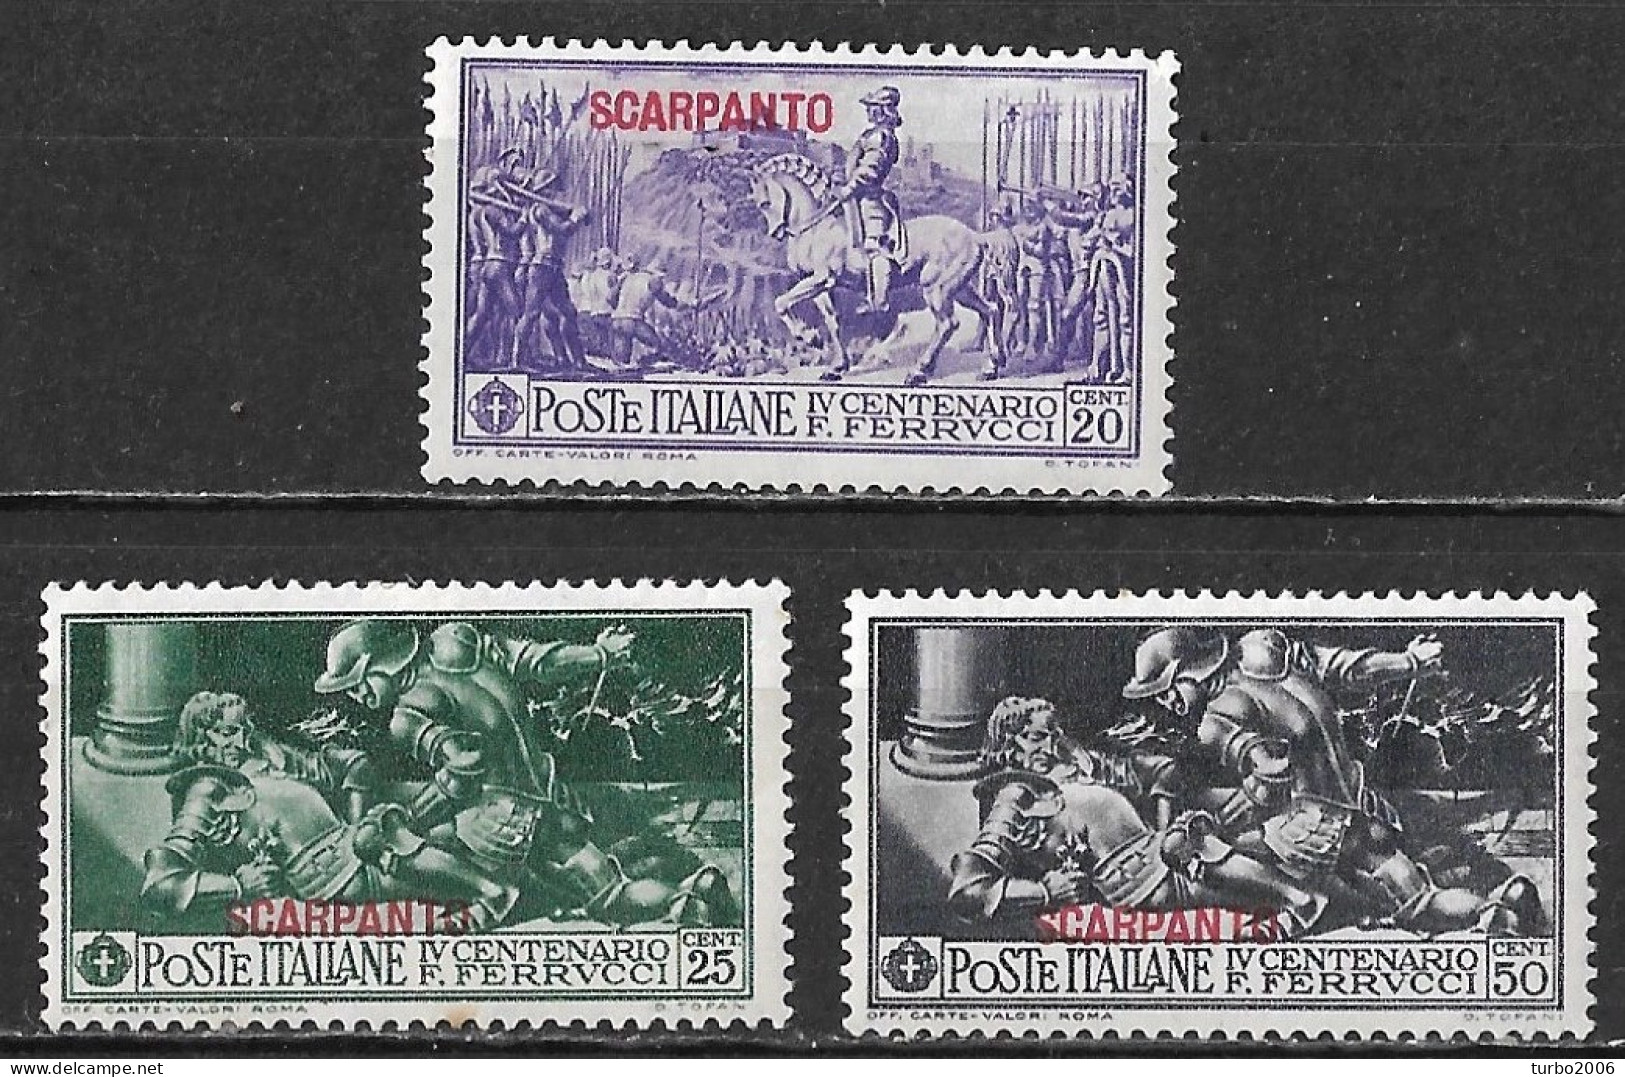 DODECANESE 1930 Stamp Of Italy Ferrucci Set With Overprint SCARPANTO 3 Values From The Set Vl. 12 / 14 MH - Dodekanisos